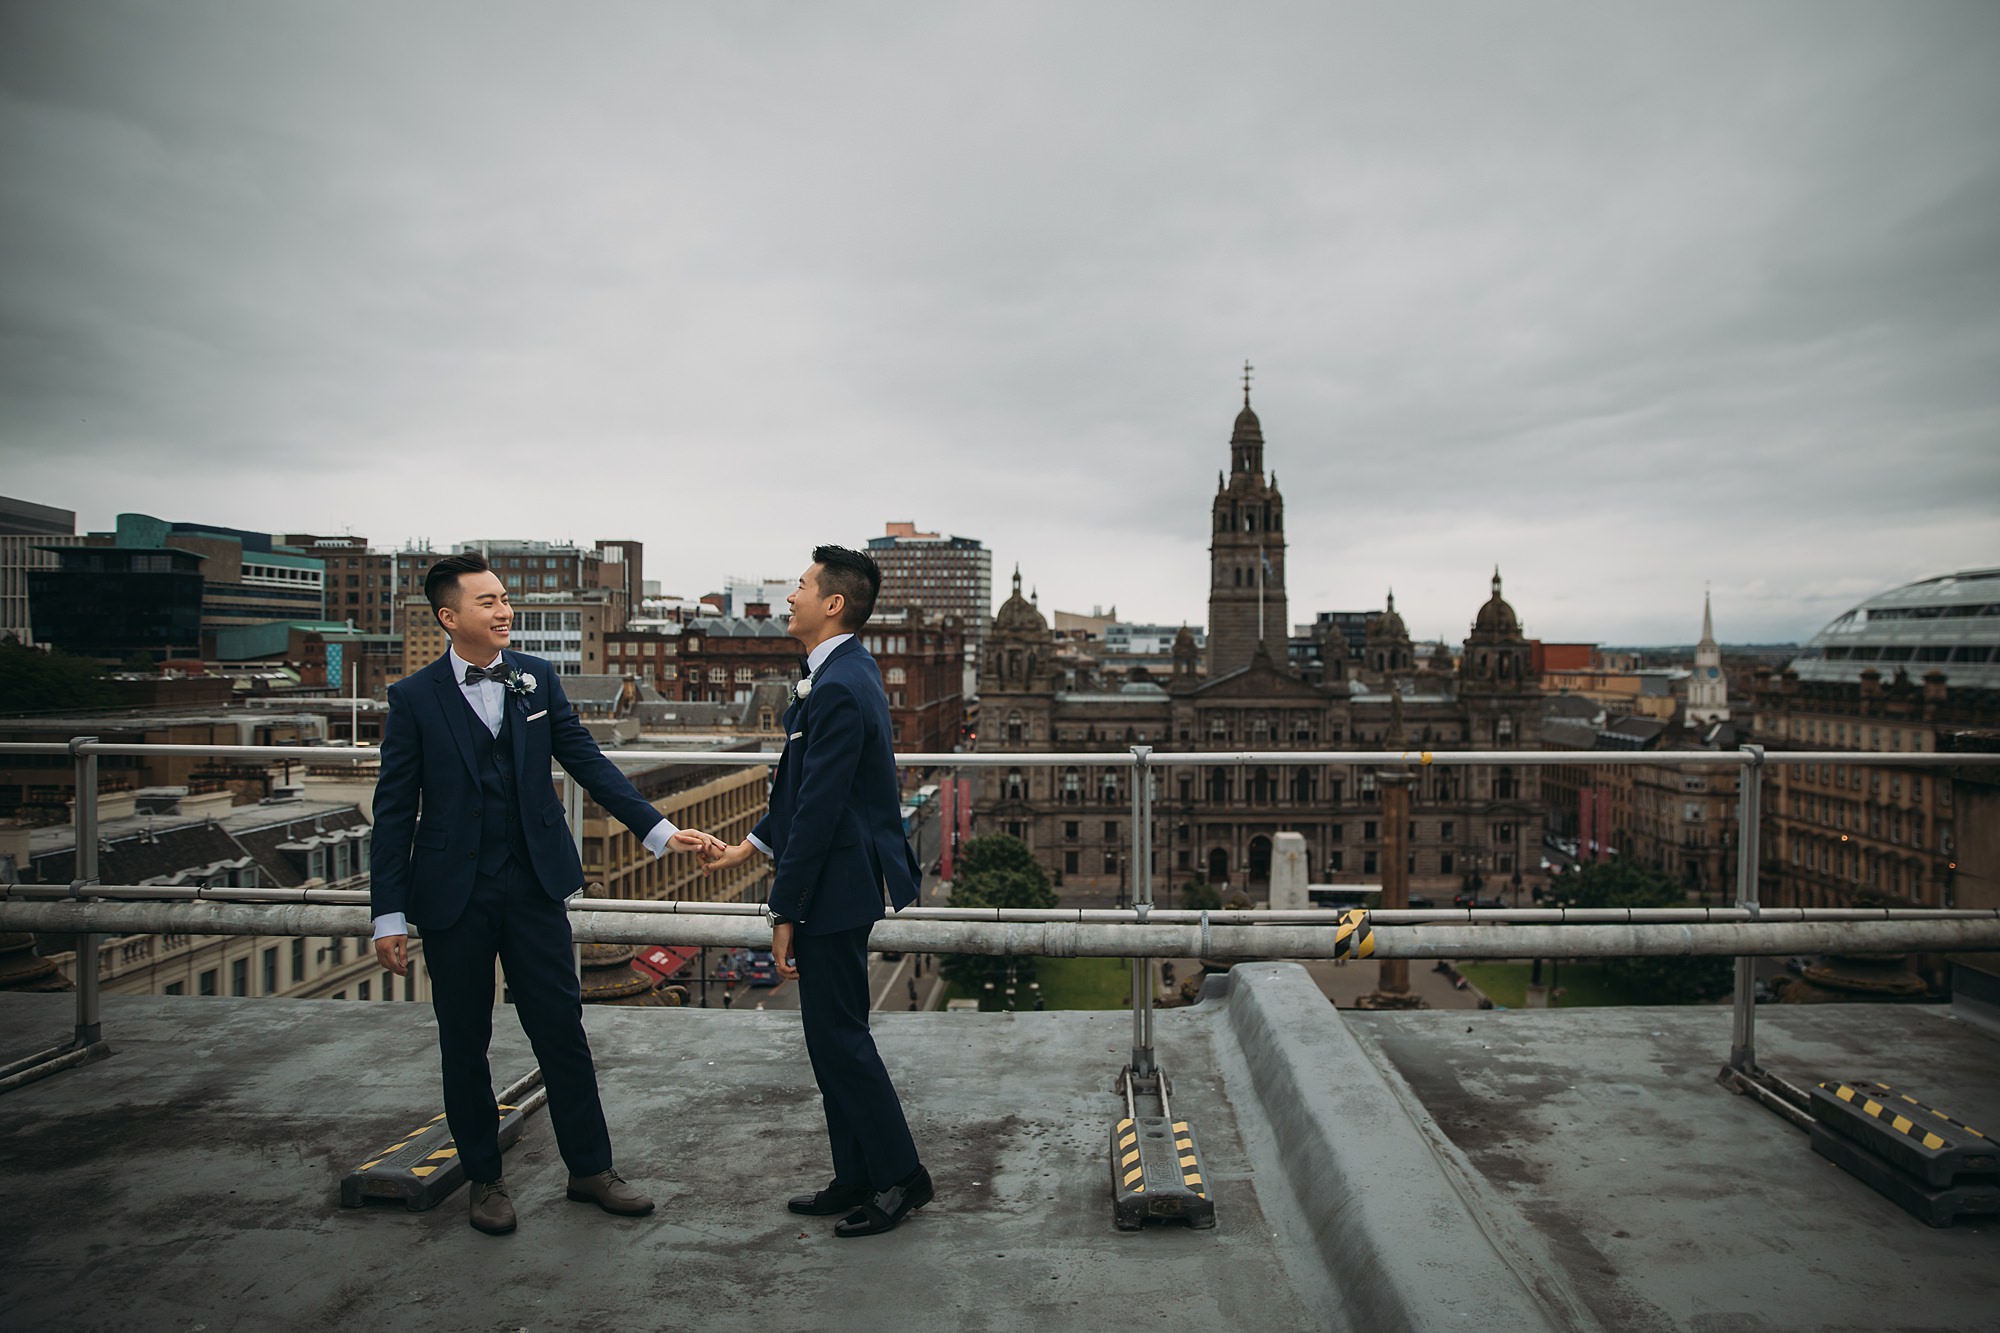 Two grooms enjoy the city views during their Glasgow elopement.